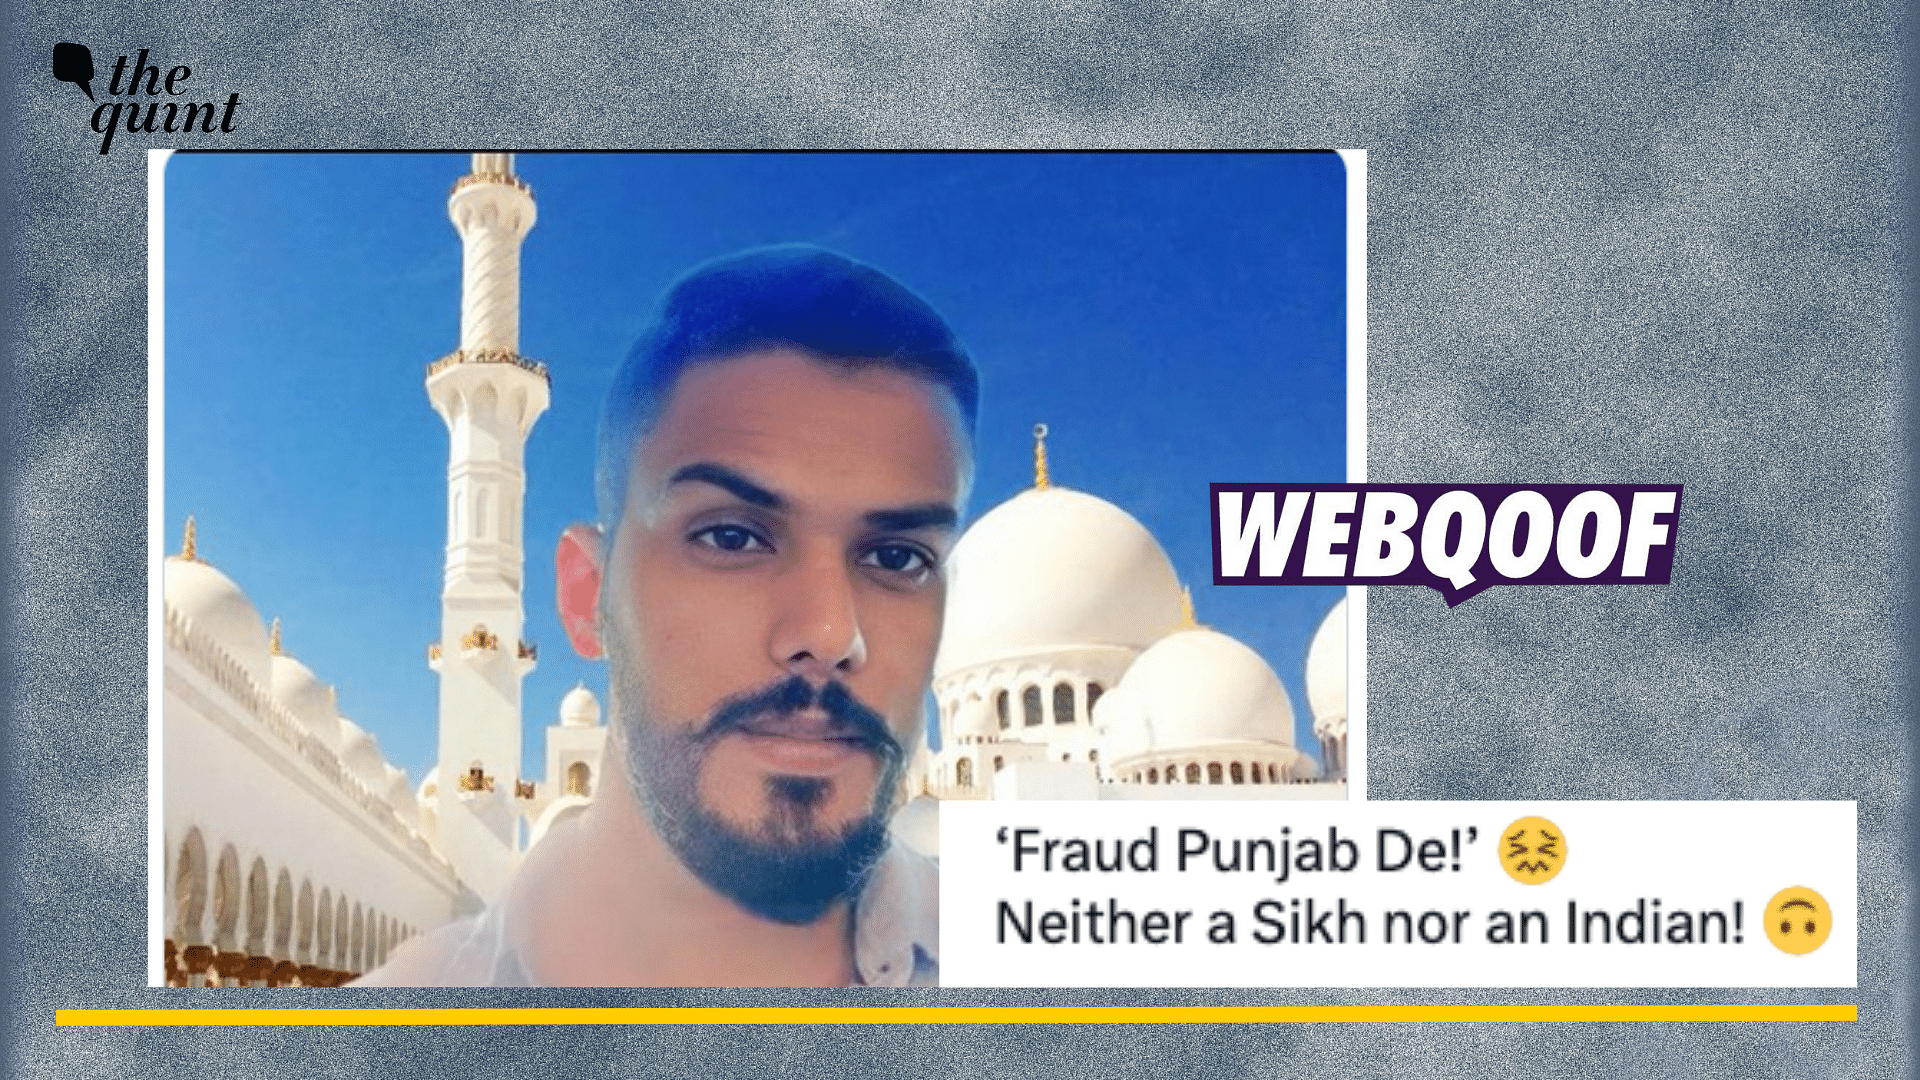 <div class="paragraphs"><p>Fact-Check: This image of Amritpal Singh has been edited to place him in front of a mosque.</p></div>